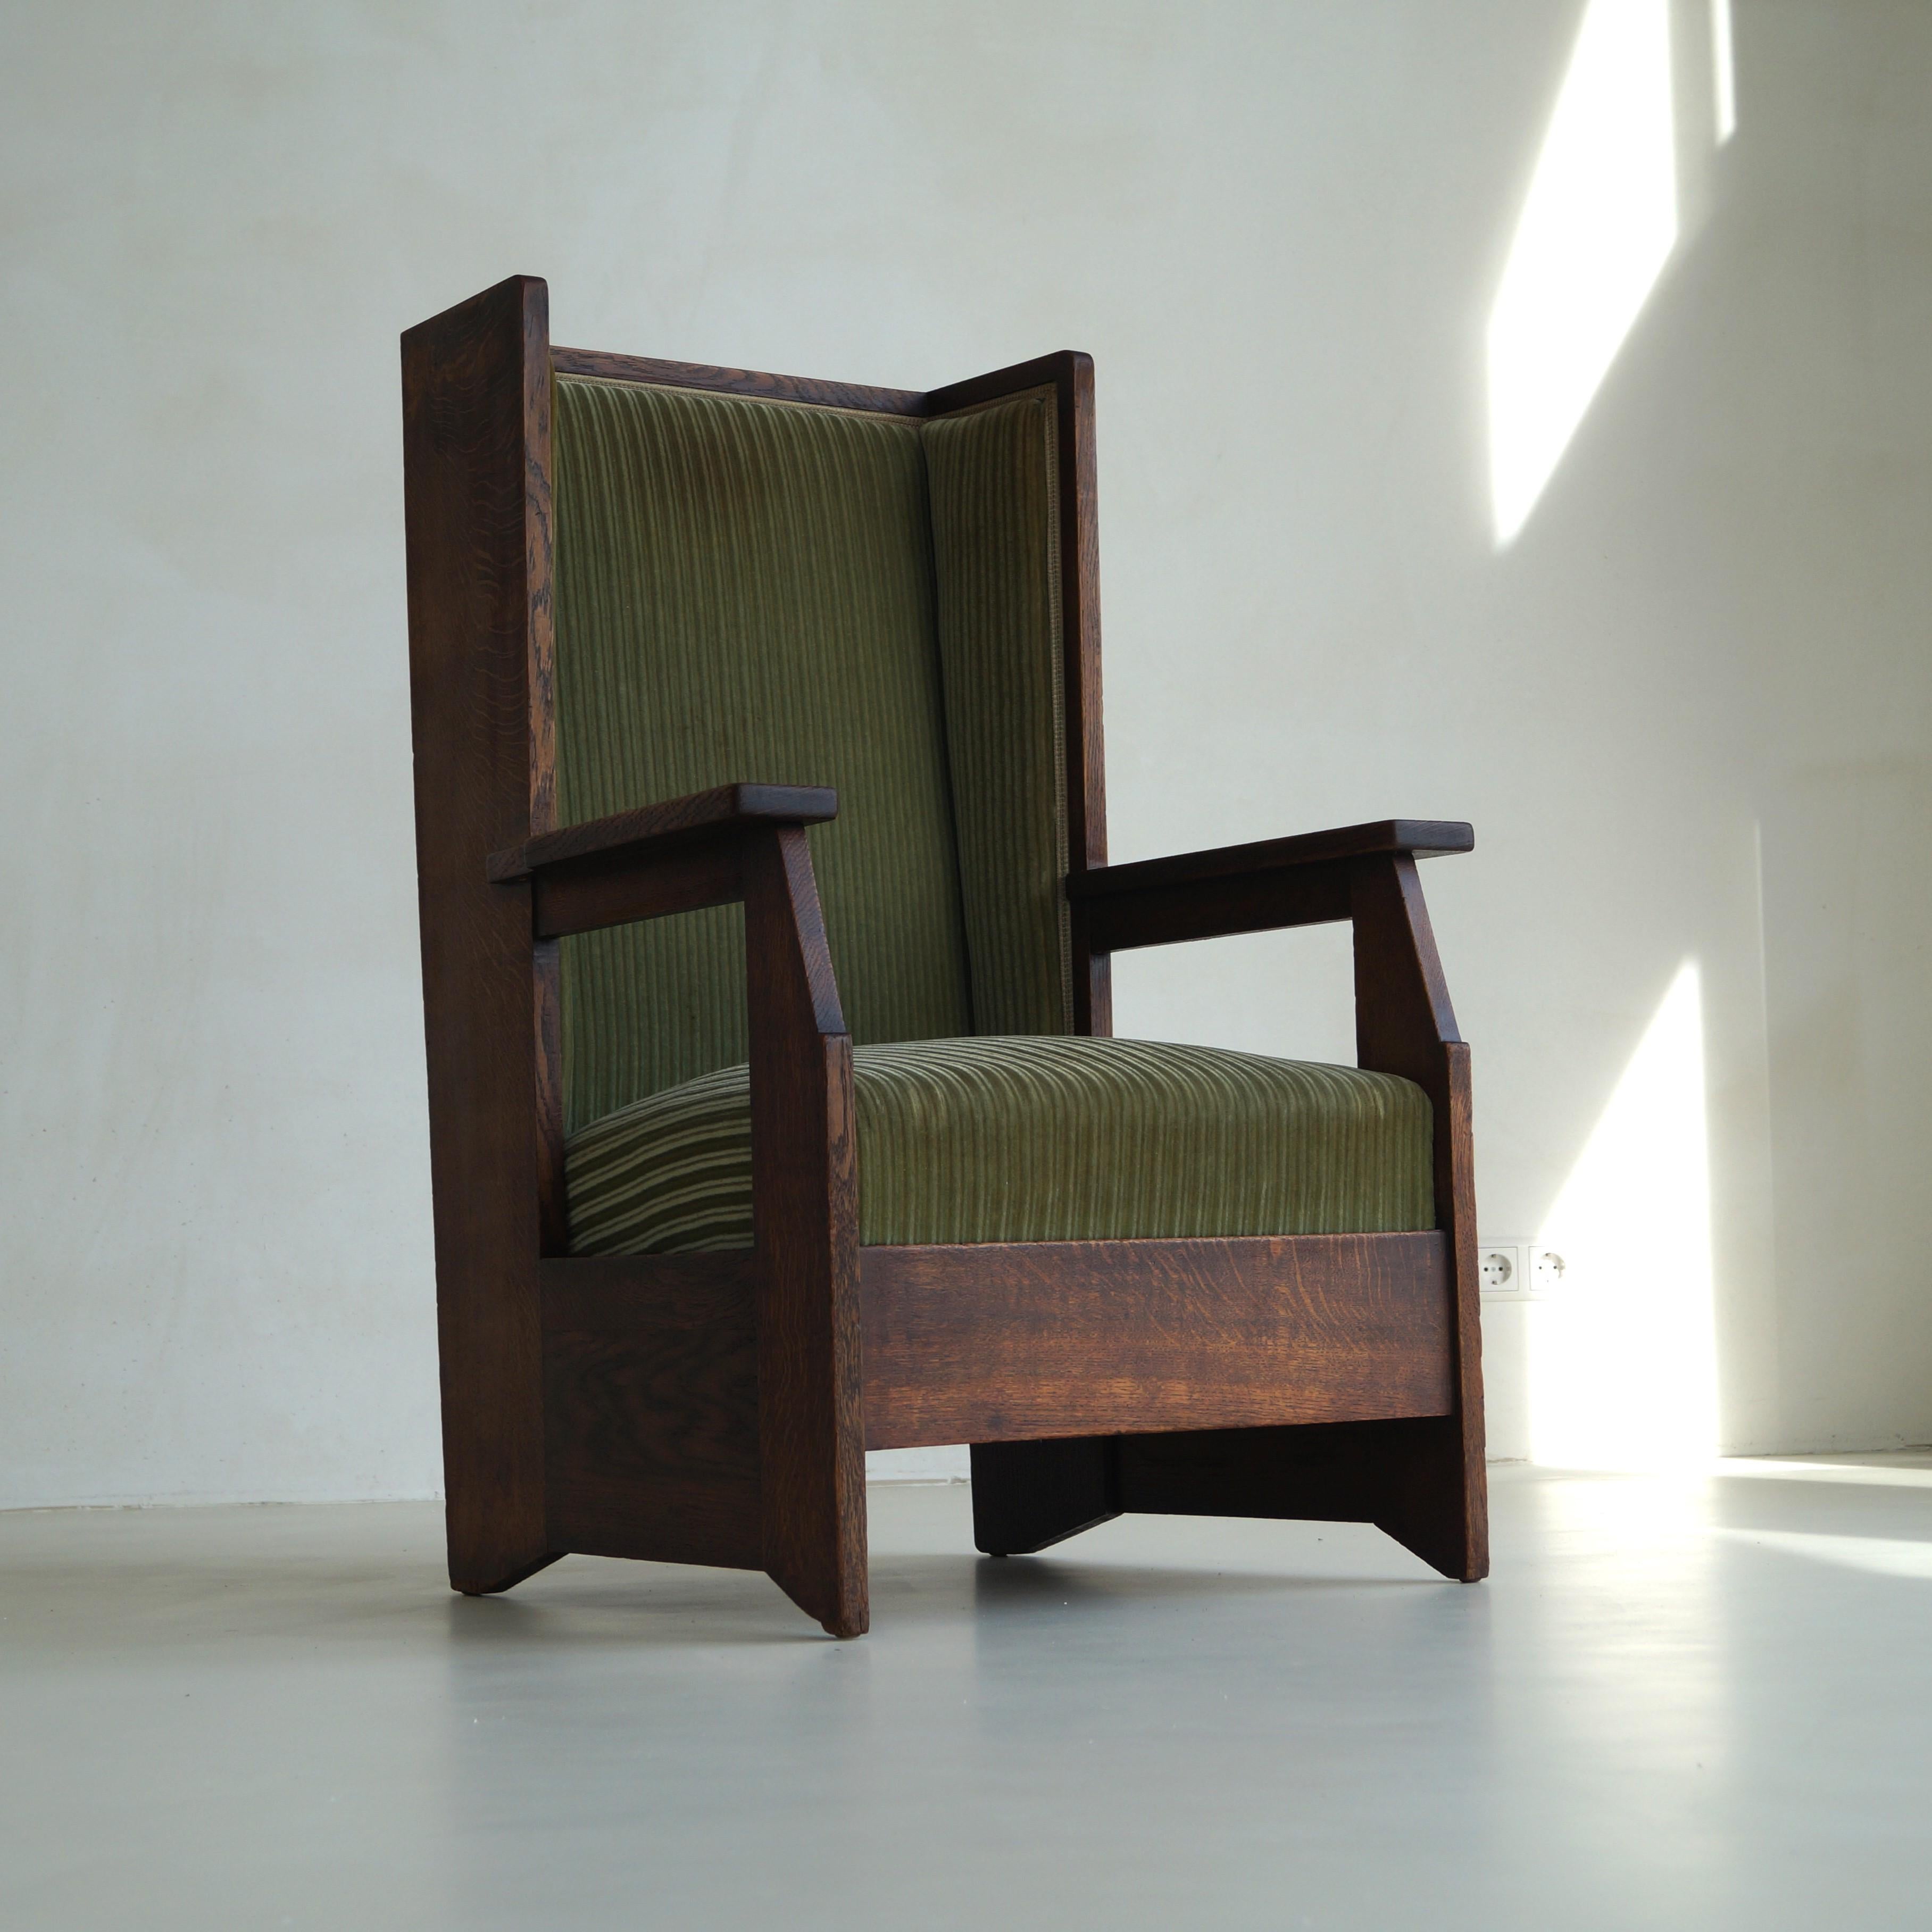 Very rare highback chair by Hendrik Wouda for Pander & sons, 1924. One of the signature designs by Hendrik Wouda, also depicted in the most referenced monographs about his life and work (picture included). The chair is very famous from the picture